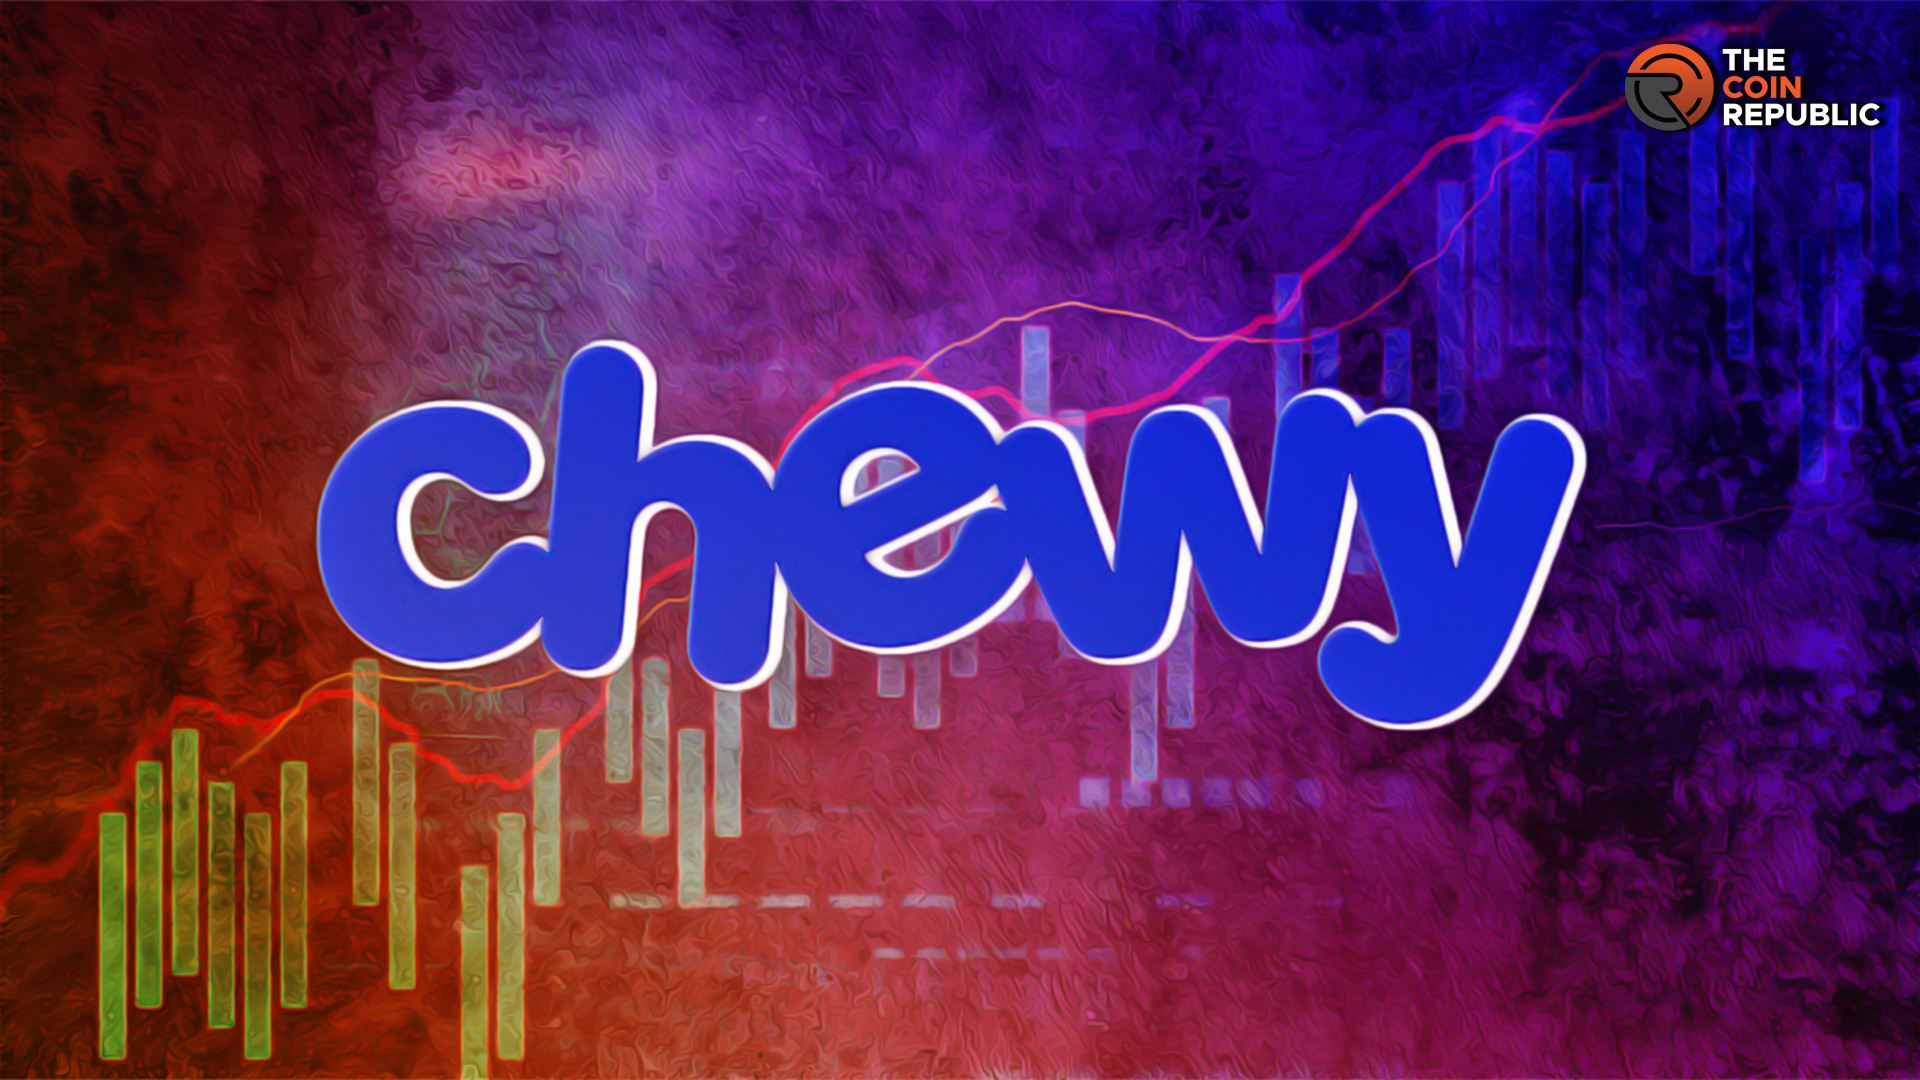 Chewy Stock Fell 19%; Should Investors Catch the Falling Knife?